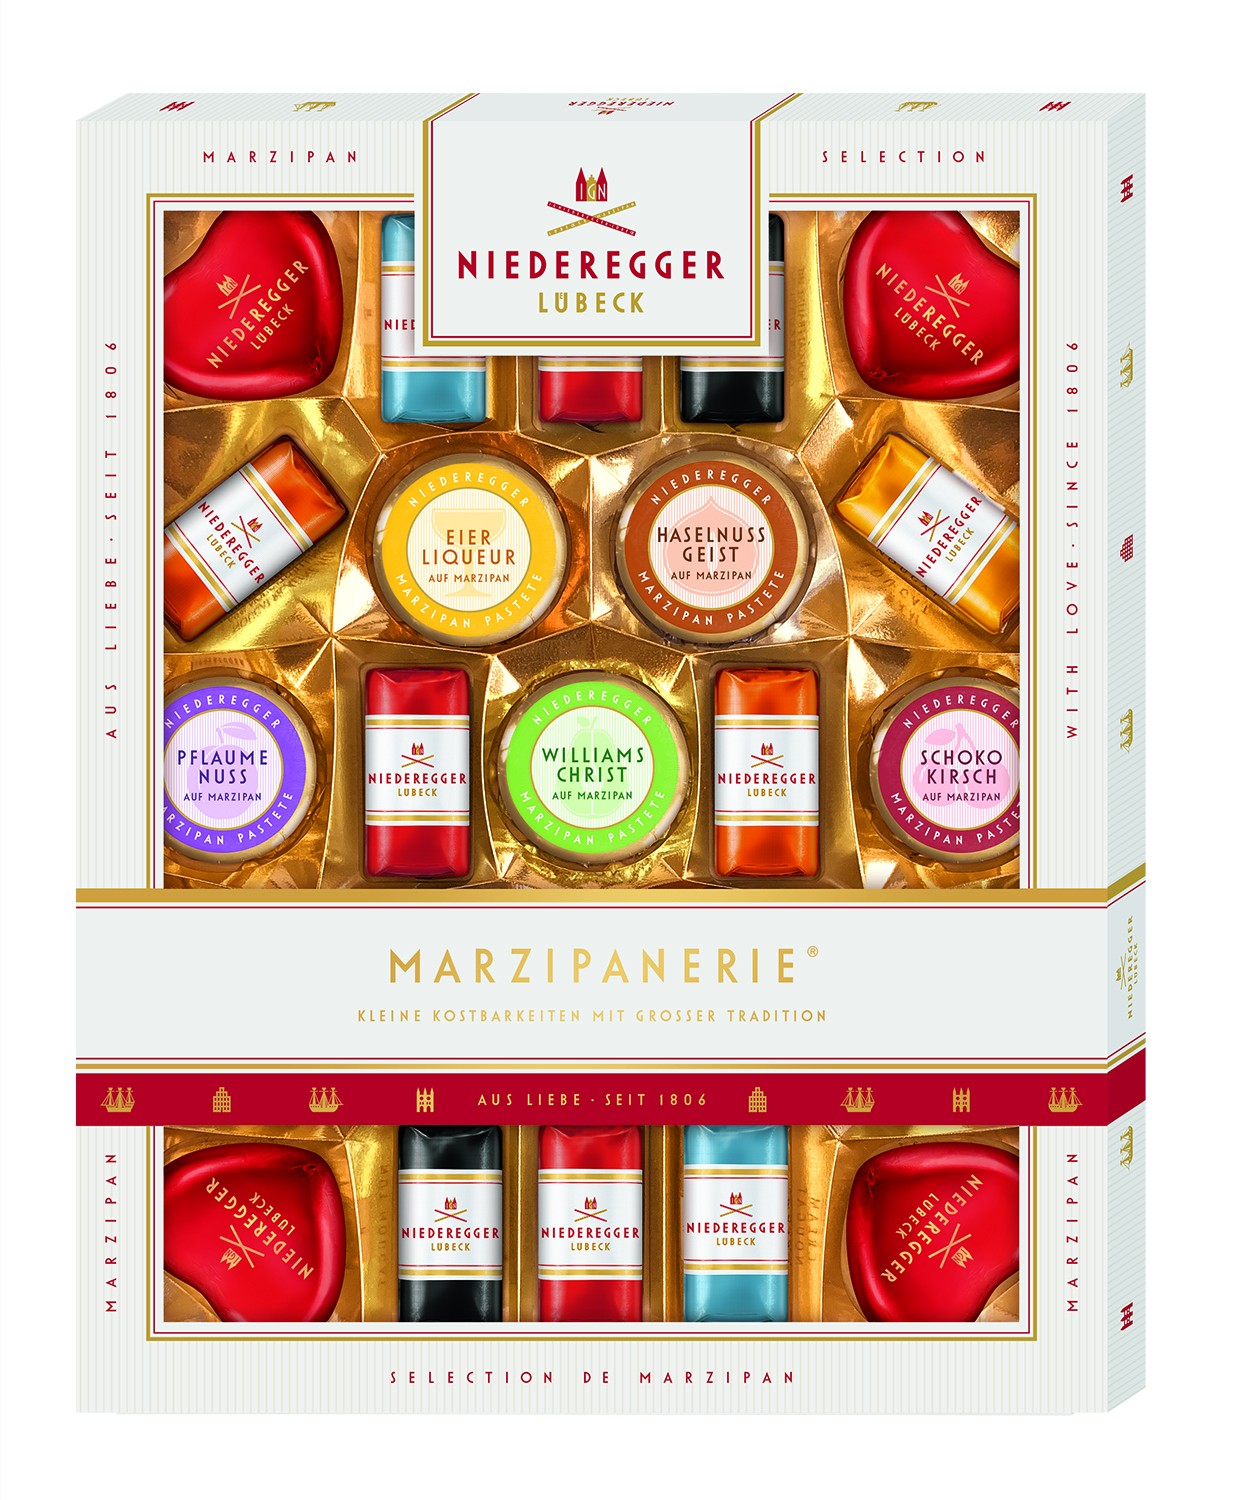 Marzipanerie Gift Box 298g 20% OFF